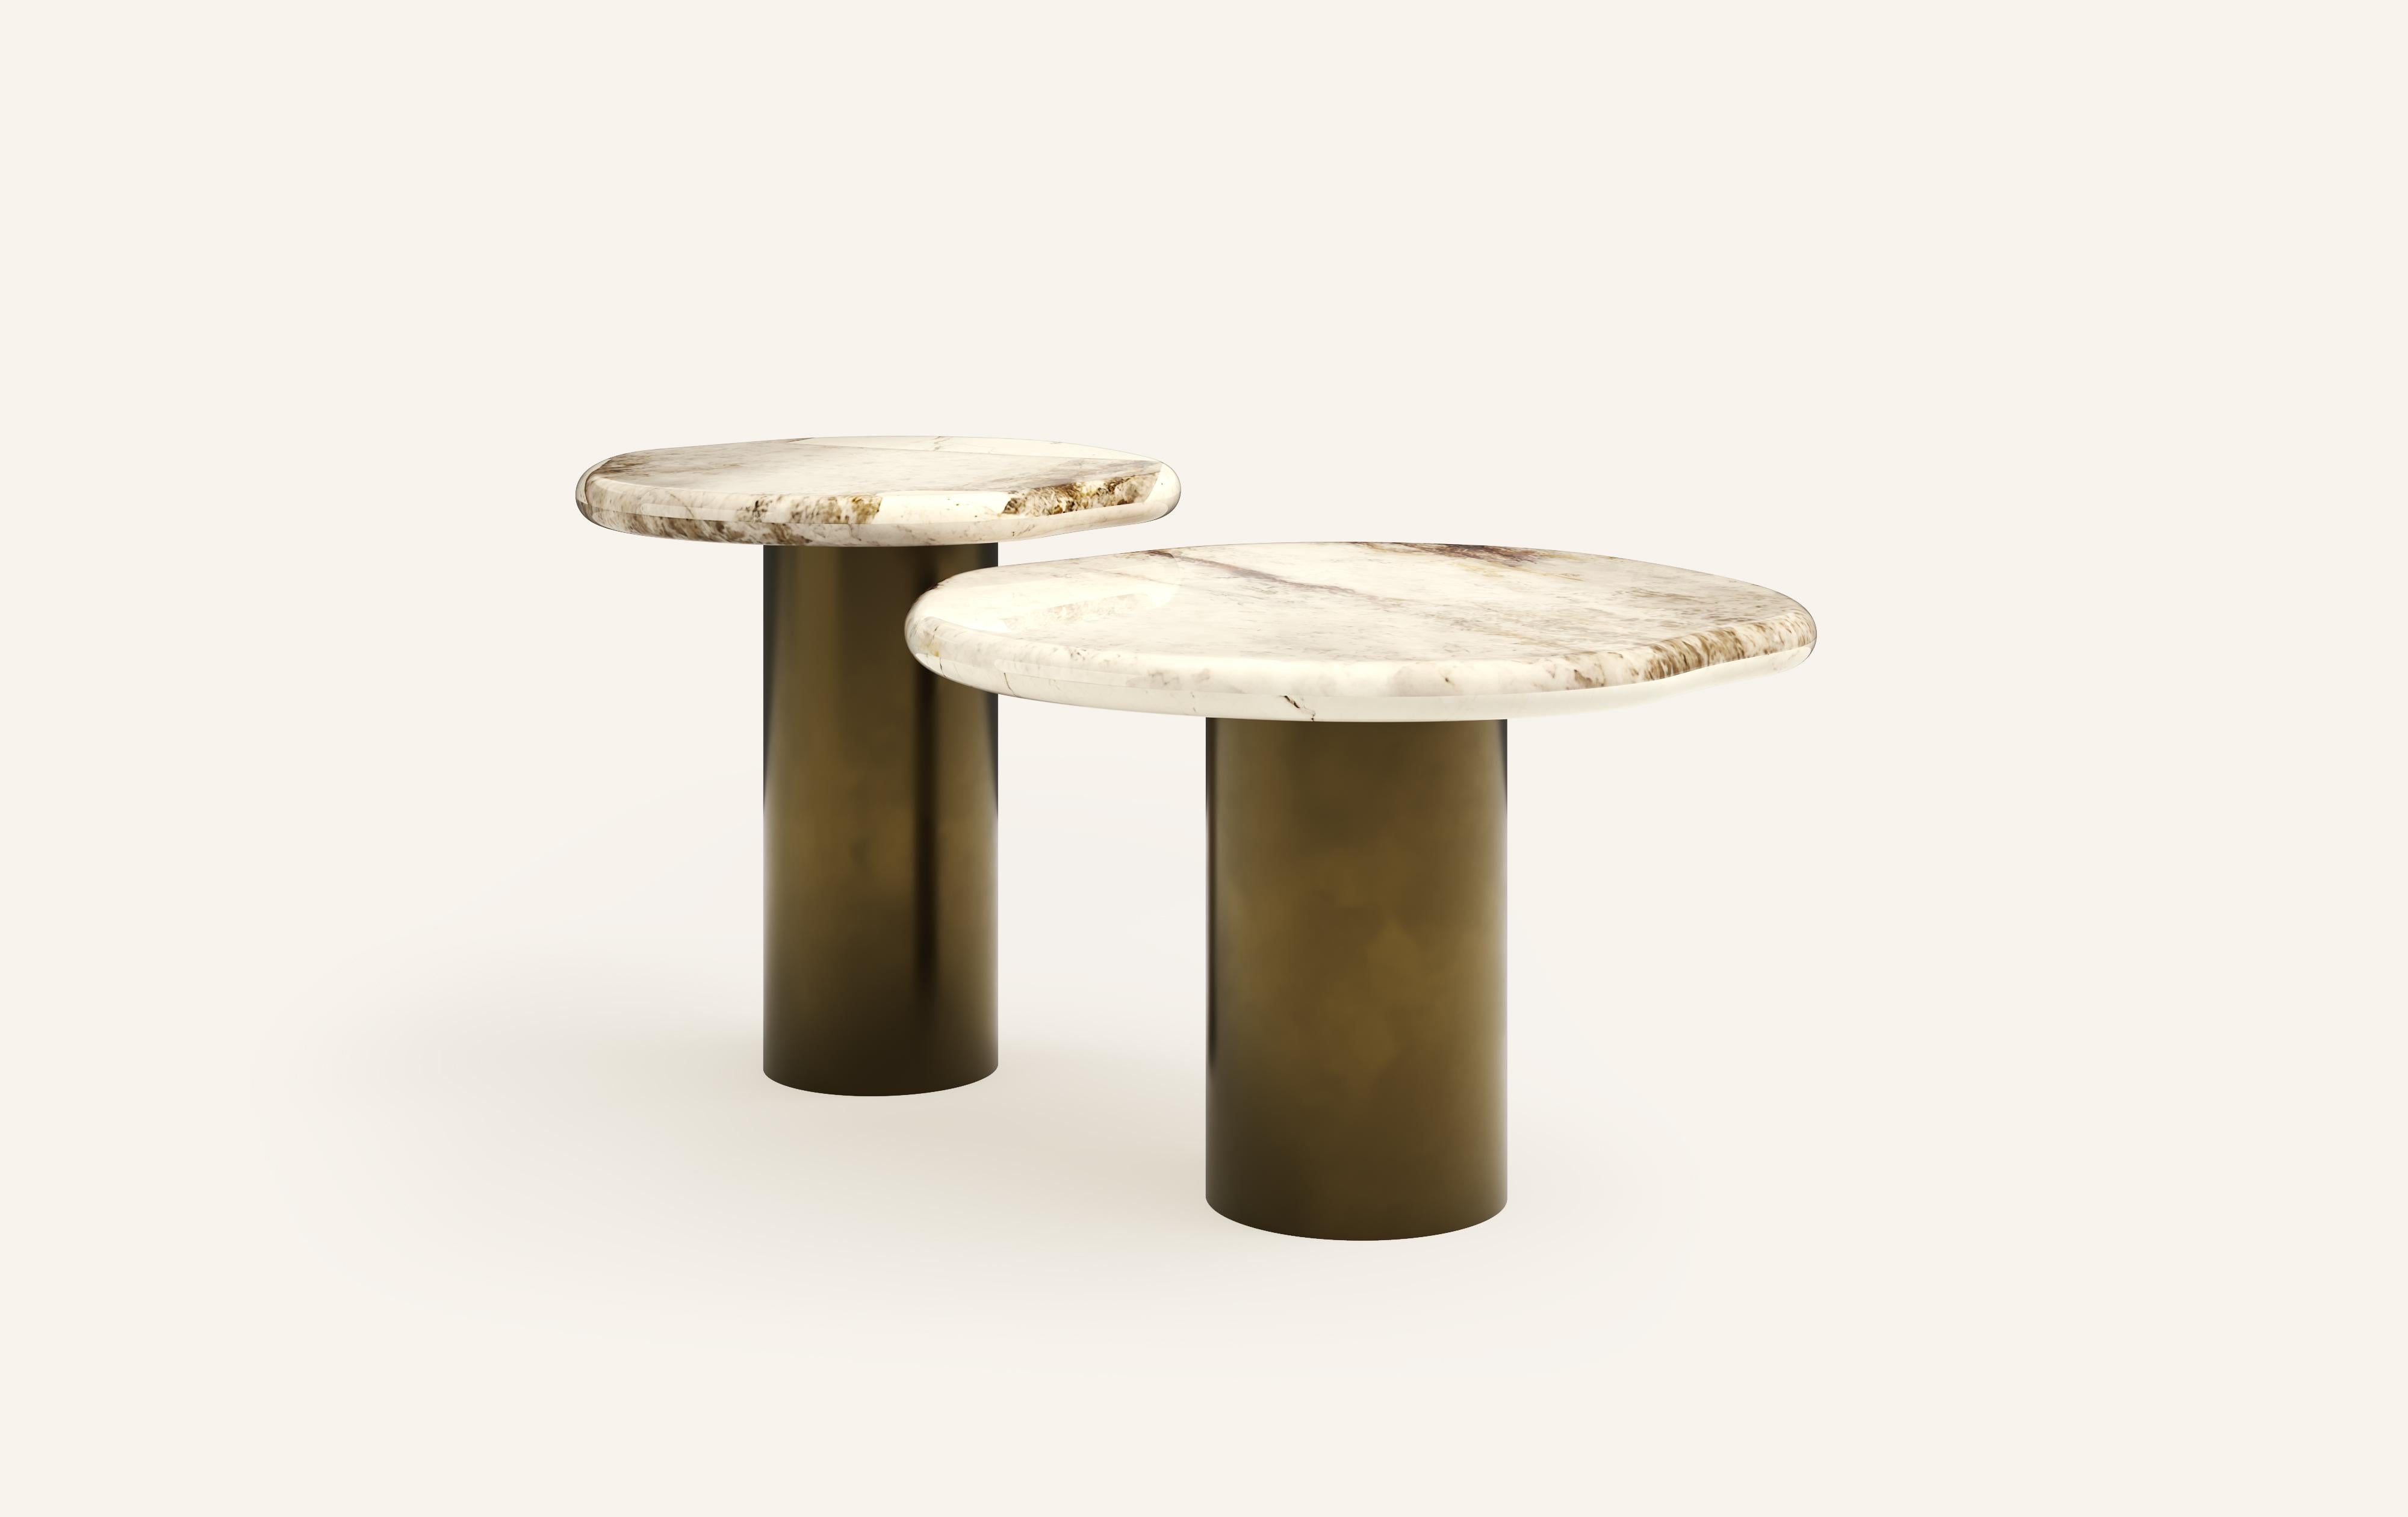 ‘LAGO’, ITALIAN FOR ‘LAKE’, HAS INSPIRED A FORM DERIVED FROM NATURE, TEXTURED WITH LUXURIOUS STONES AND METALS. THE COLLECTION ENCOURAGES NESTING AND LAYERING IN ITS AVAILABLE FORMS.

DIMENSIONS: (SIDE TABLES SOLD INDIVIDUALLY): 
24”L x 24”W x 16”H: